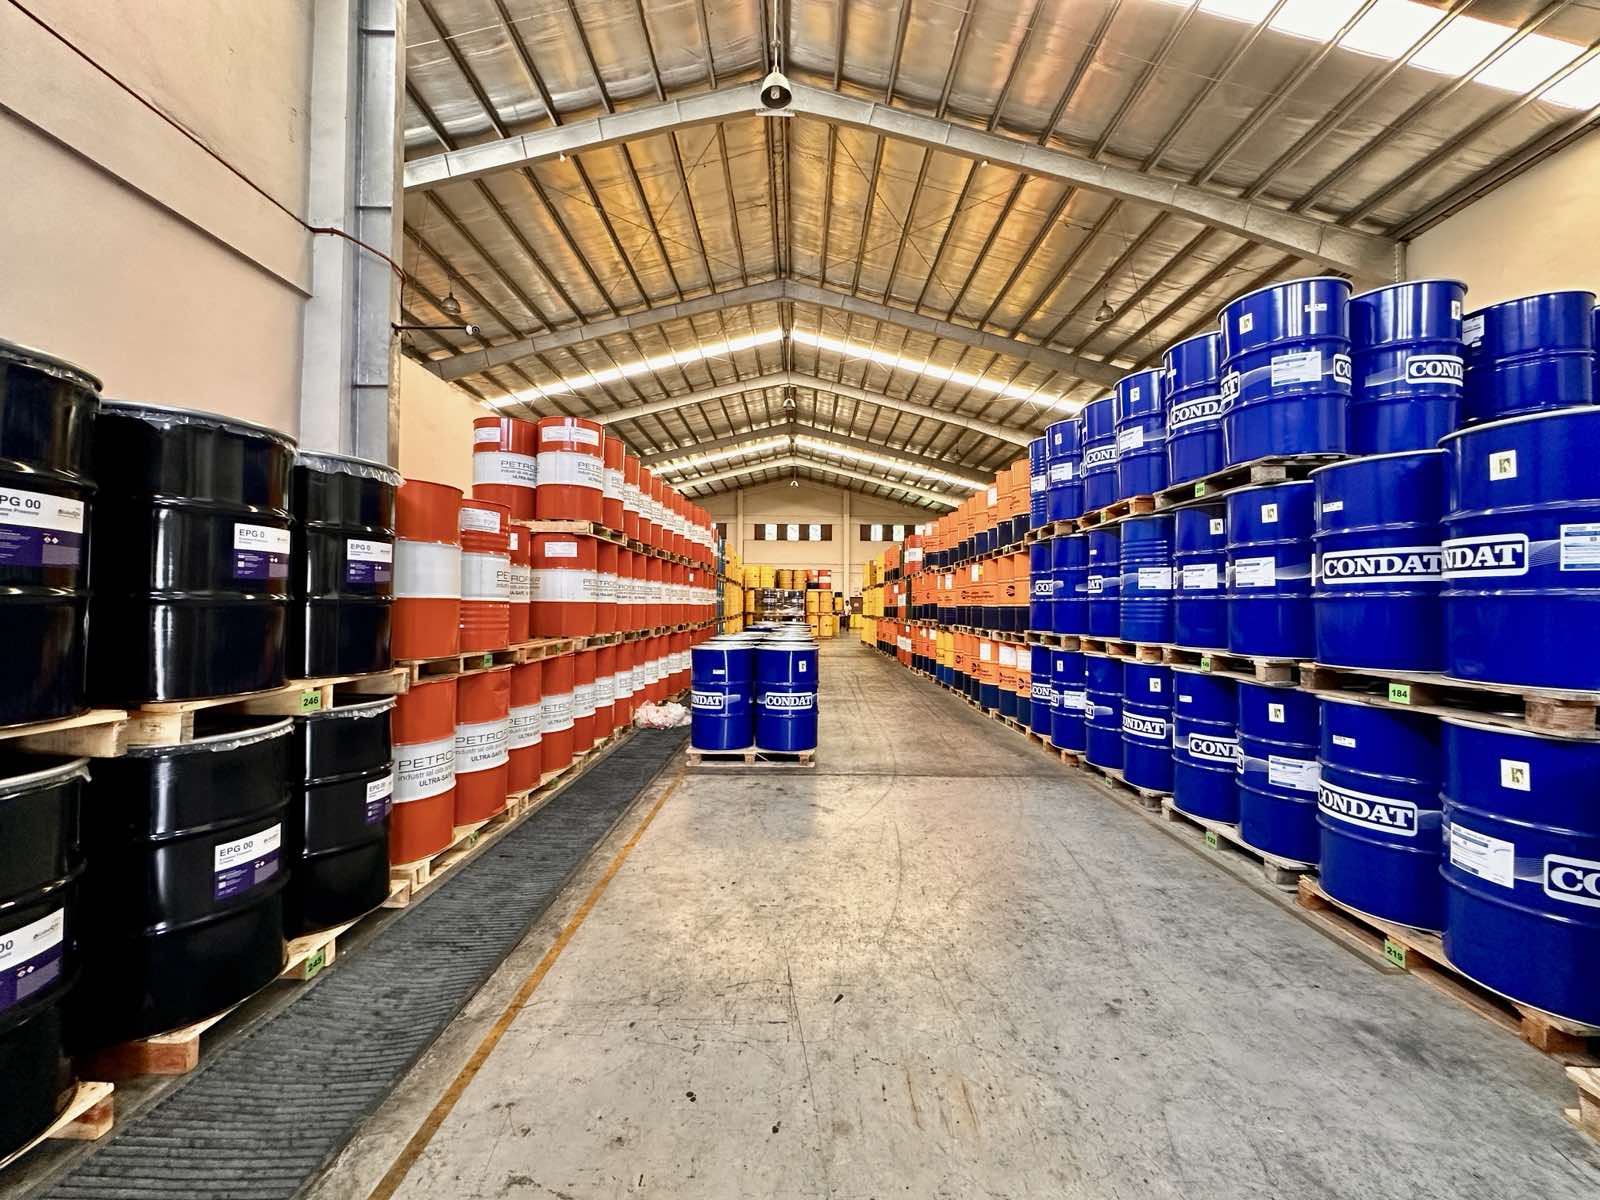 Warehouse with colorful industrial lubricant drums organized on pallets.